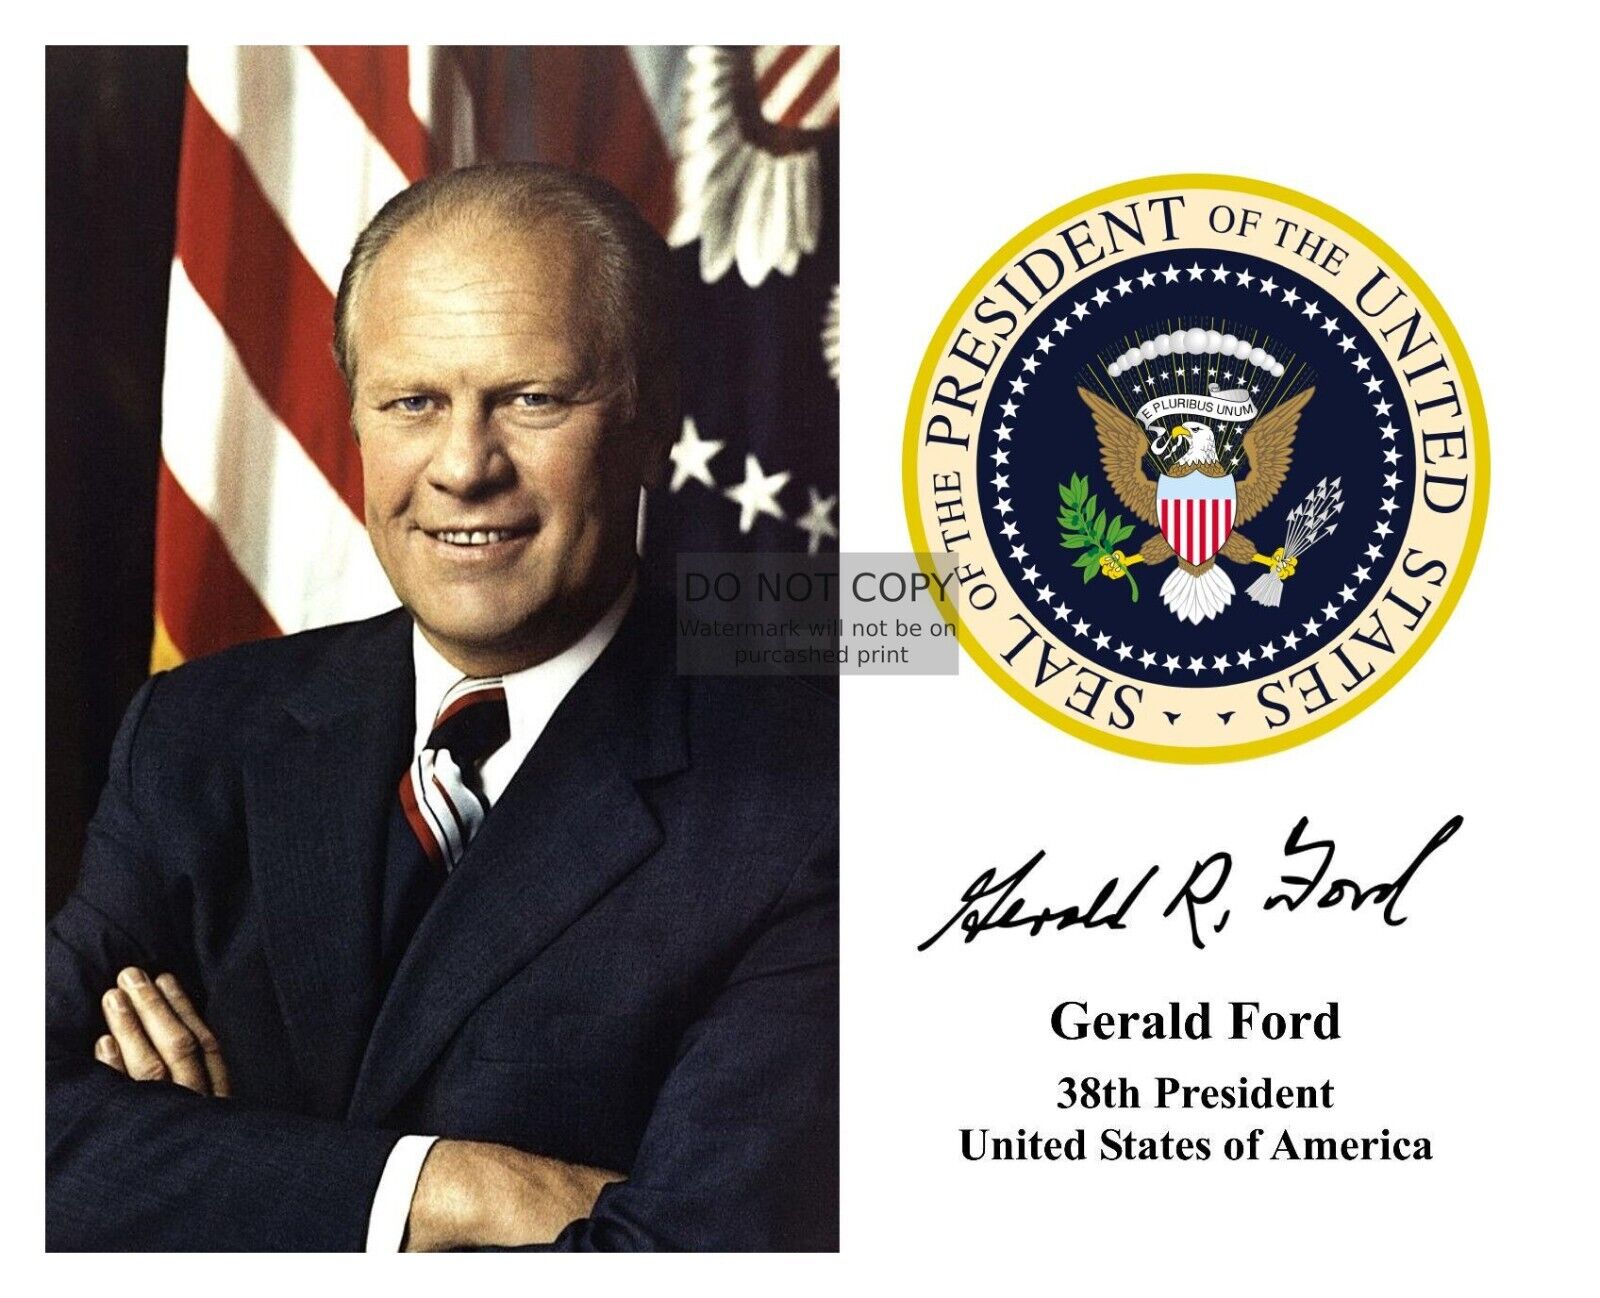 PRESIDENT GERALD FORD PRESIDENTIAL SEAL AUTOGRAPHED 8X10 PHOTOGRAPH